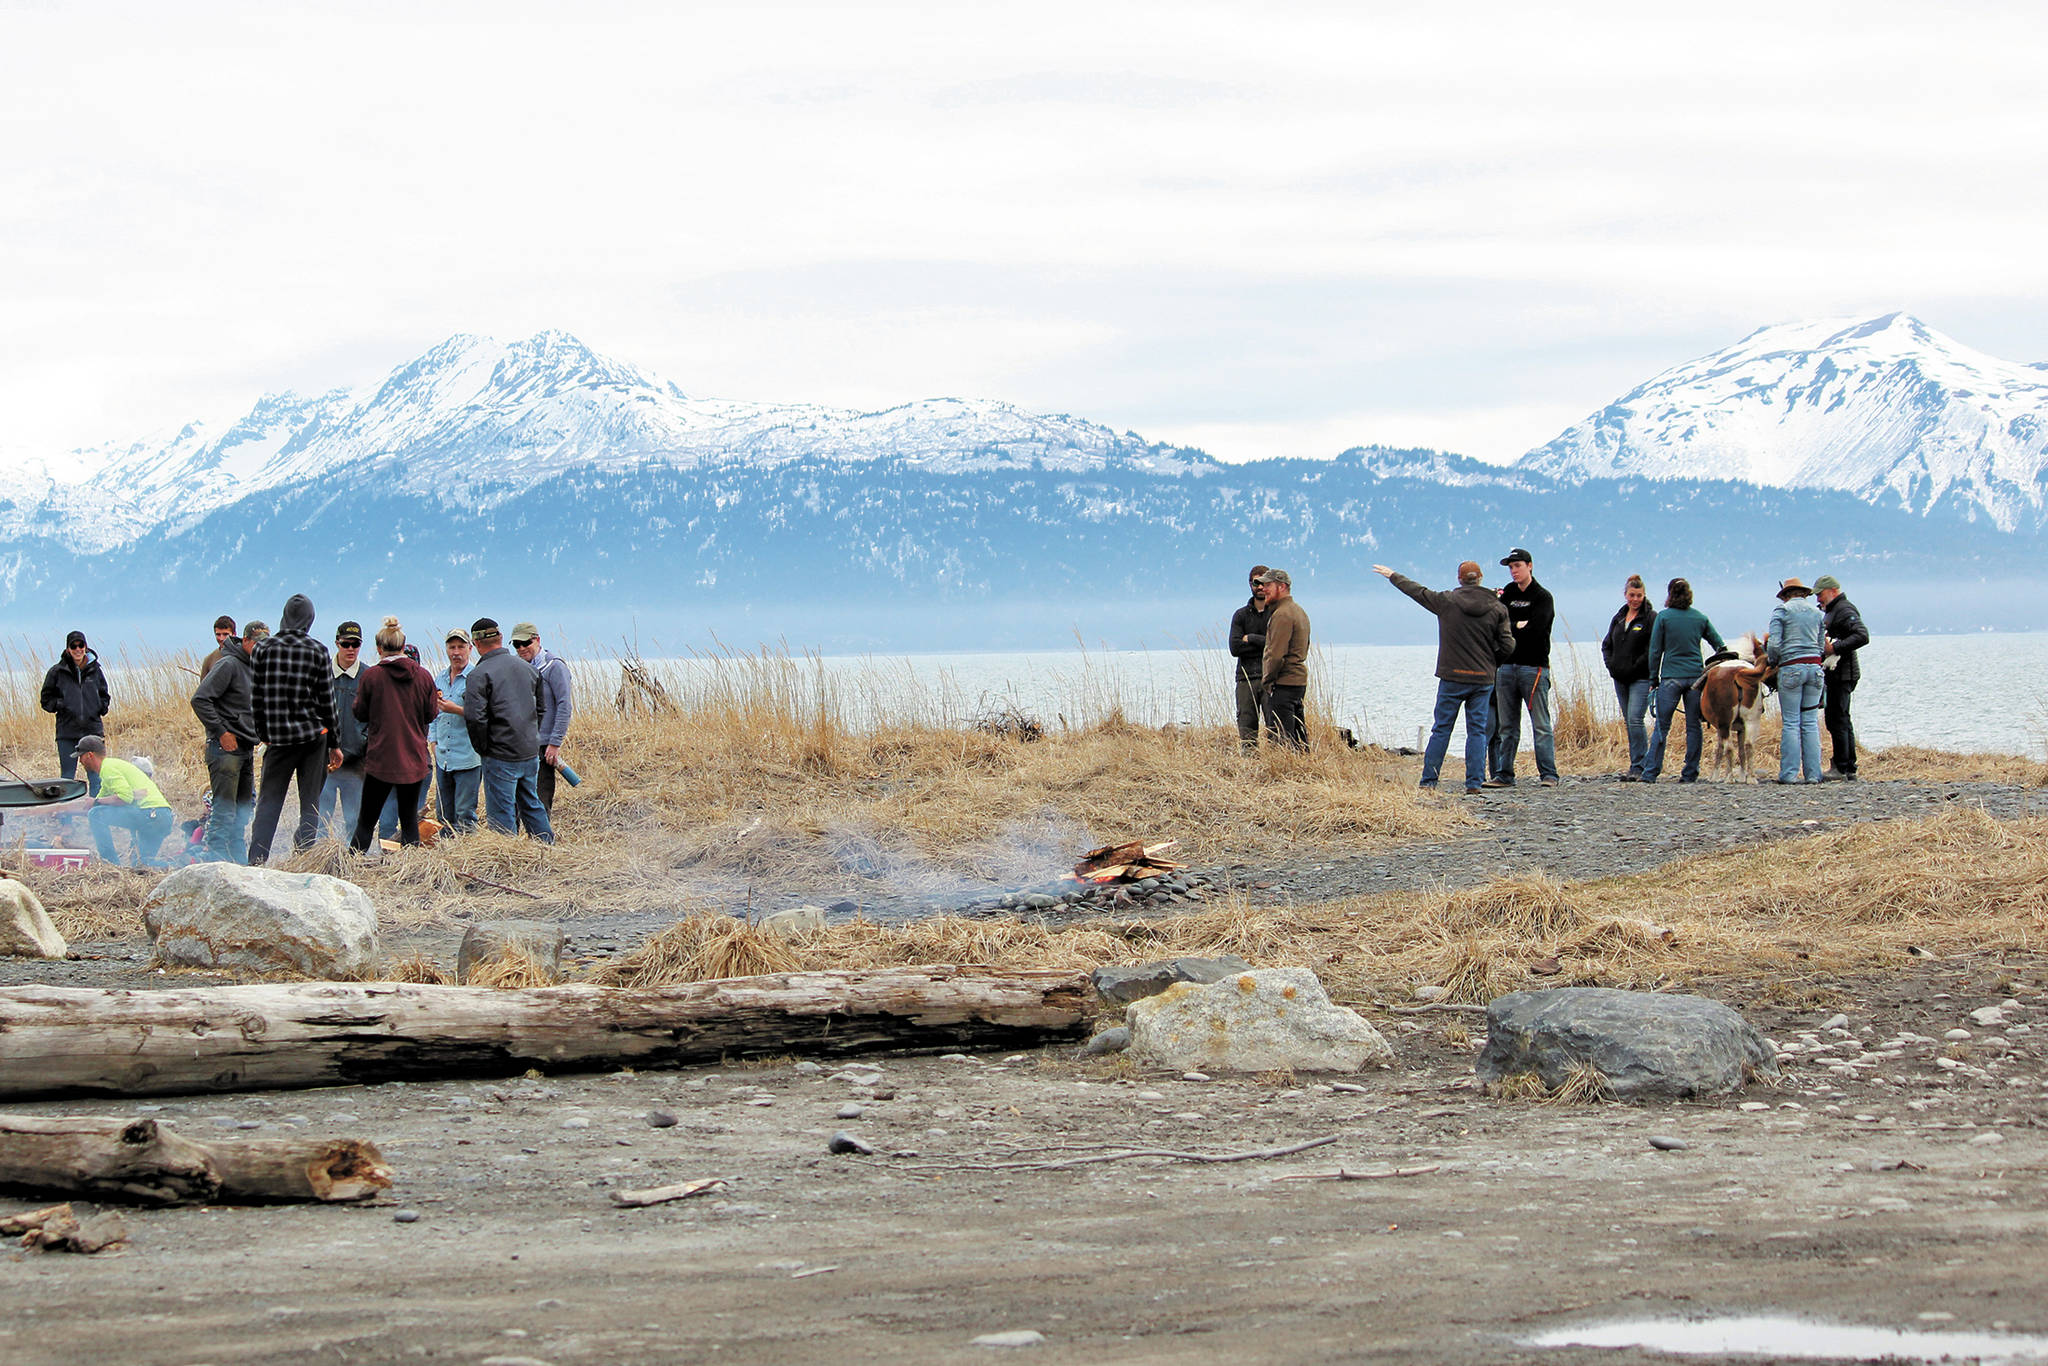 Participants in a community gathering and barbecue event spend time together on the beach Saturday, April 18, 2020 at Mariner Park in Homer, Alaska. The gathering was held by the Homer’s Sons of Liberty while the state health mandate that bans all in-person gatherings was still in place. (Photo by Megan Pacer/Homer News)